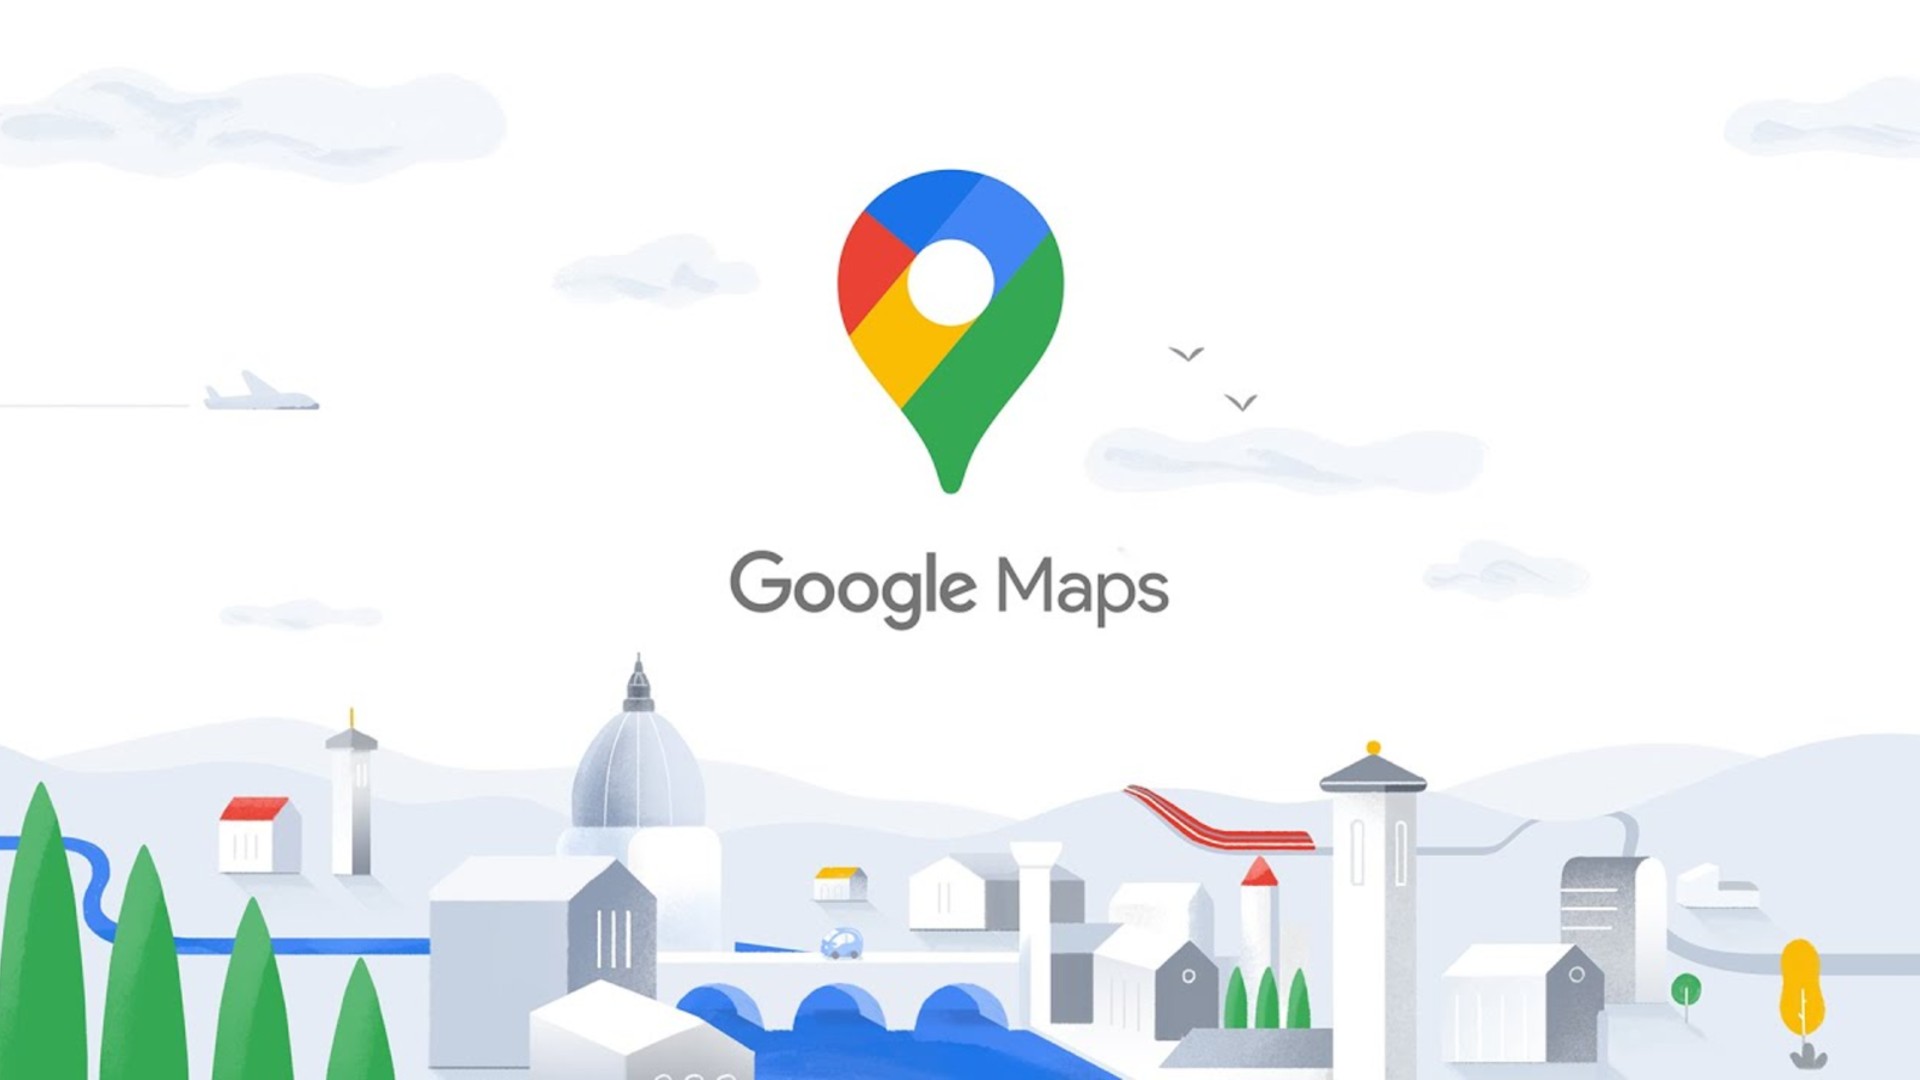 Google Maps Launches New Features That Will Make Travel Safer, Quicker & Easier